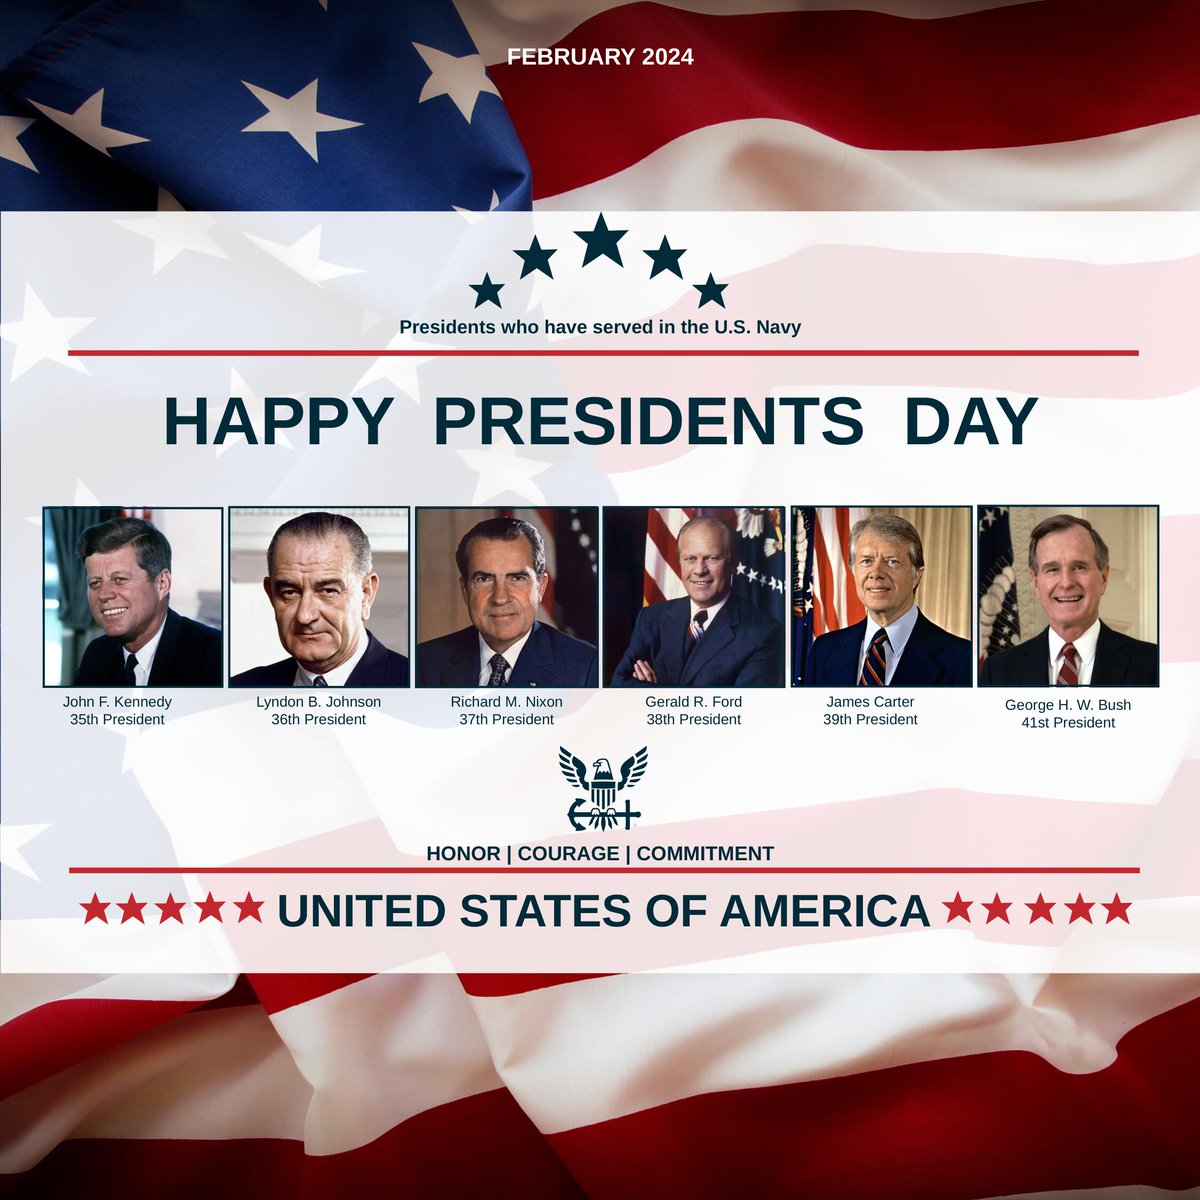 🇺🇸 Today, the United States Navy celebrates all U.S. presidents past and present! We would like to wish everyone in our Navy family a safe, happy, and smooth-sailing #PresidentsDay ⚓